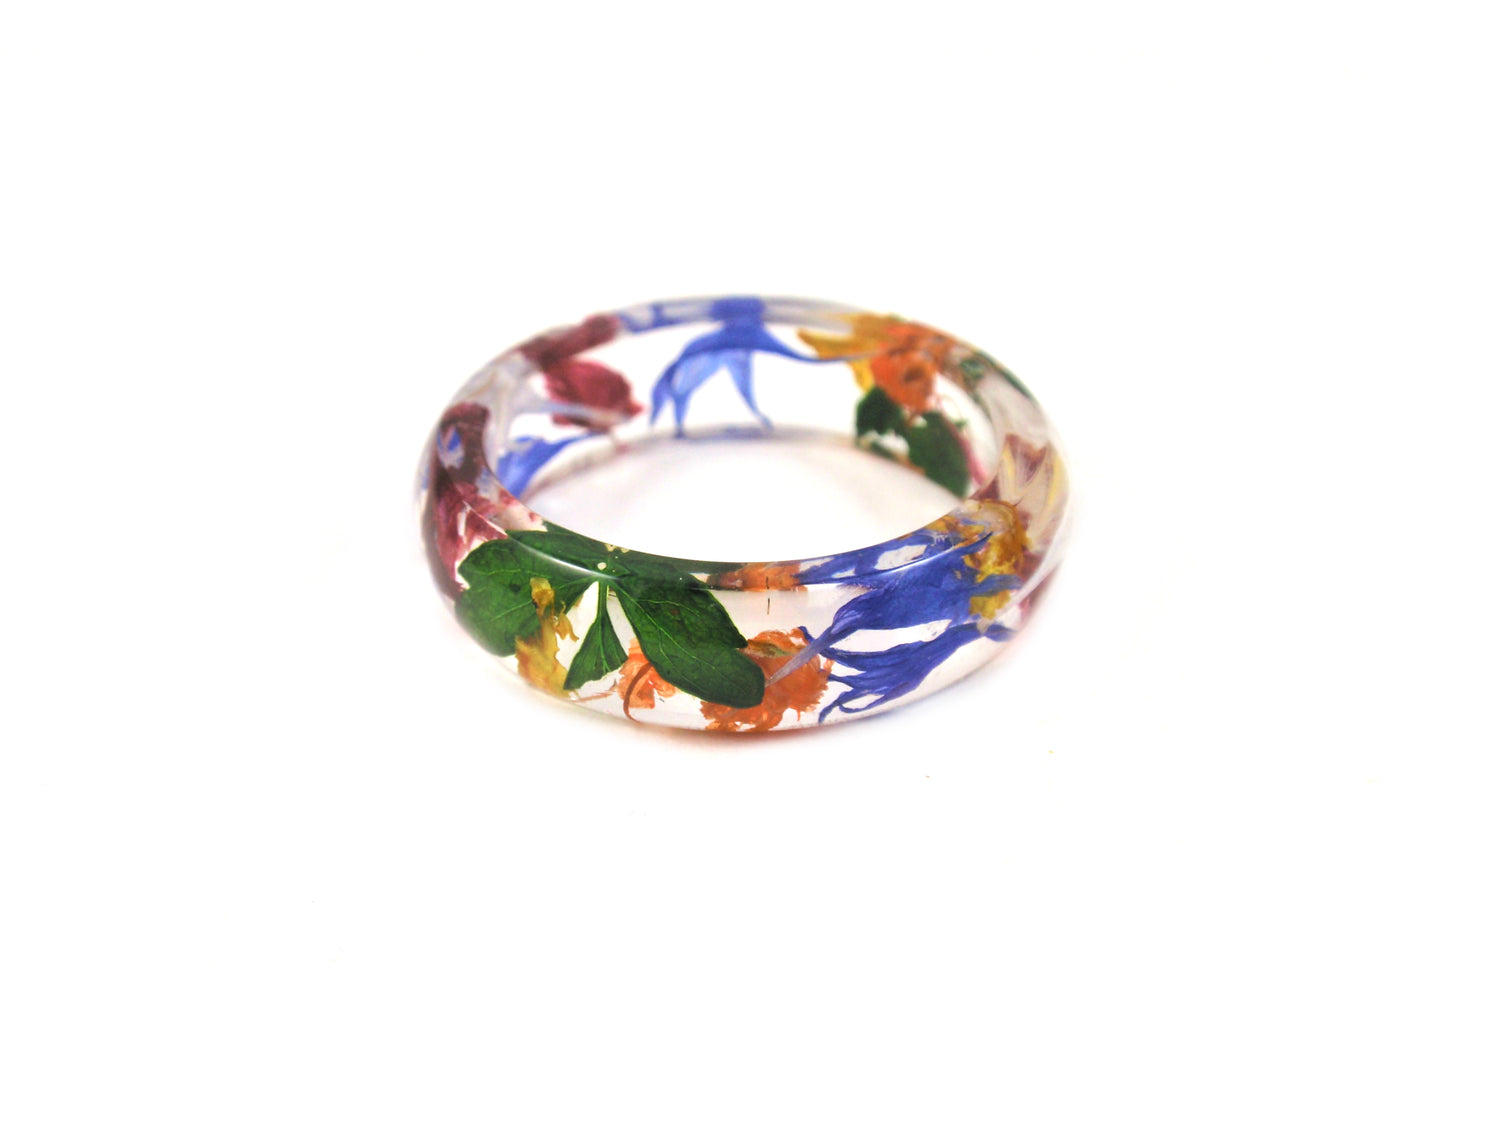 Botanical rings by Smile With Flower. Real pressed flowers and greens encased in leweler's resin. 